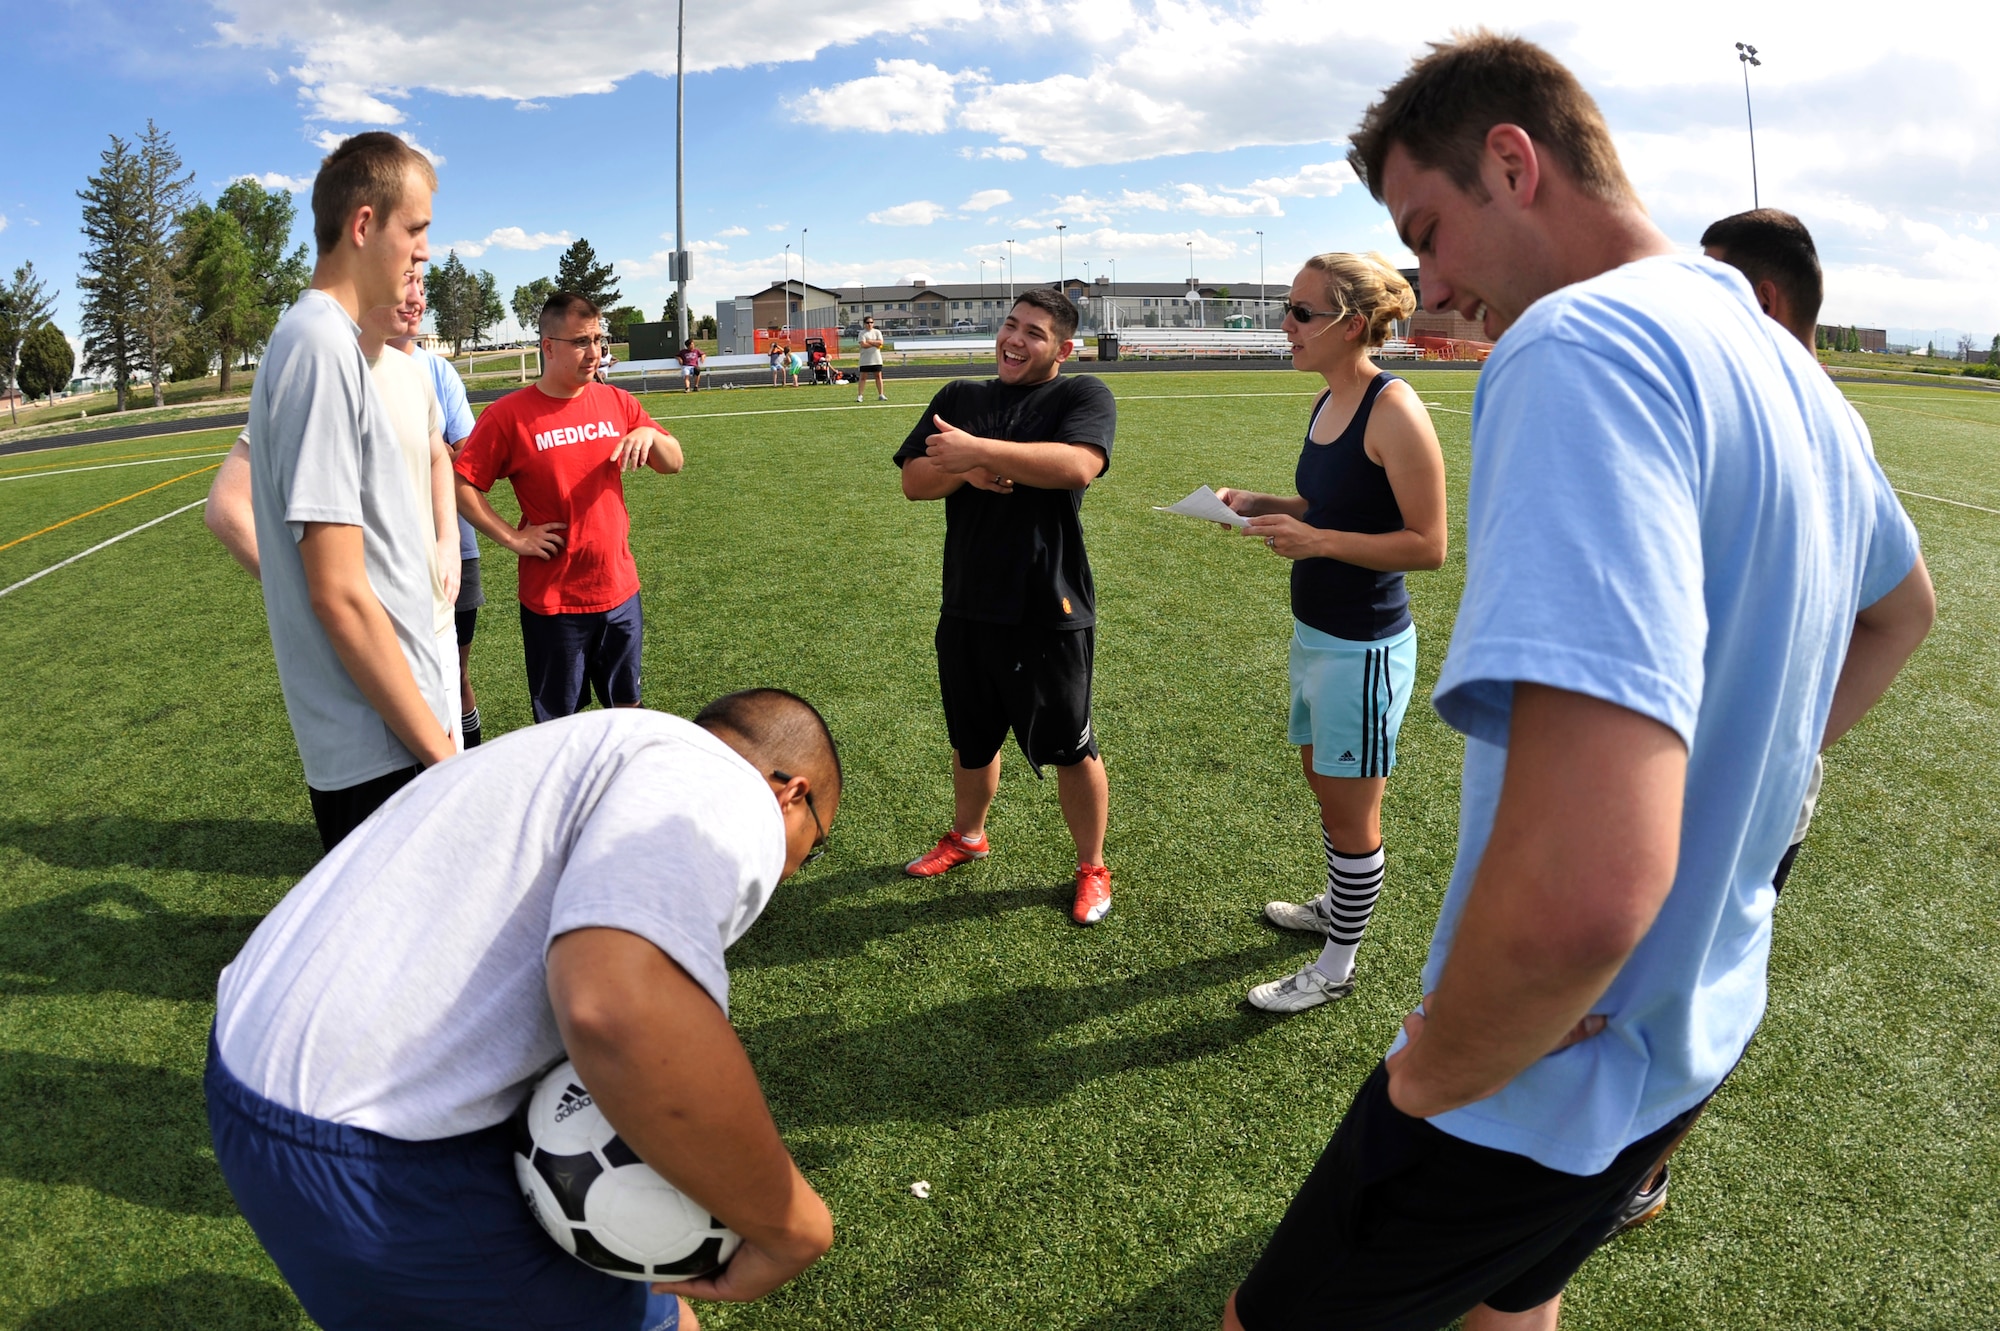 BUCKLEY AIR FORCE BASE, Colo. --  Prospective intramural soccer players huddle up for team planning June 16. (U.S. Air Force photo by Airman 1st Class Paul Labbe)